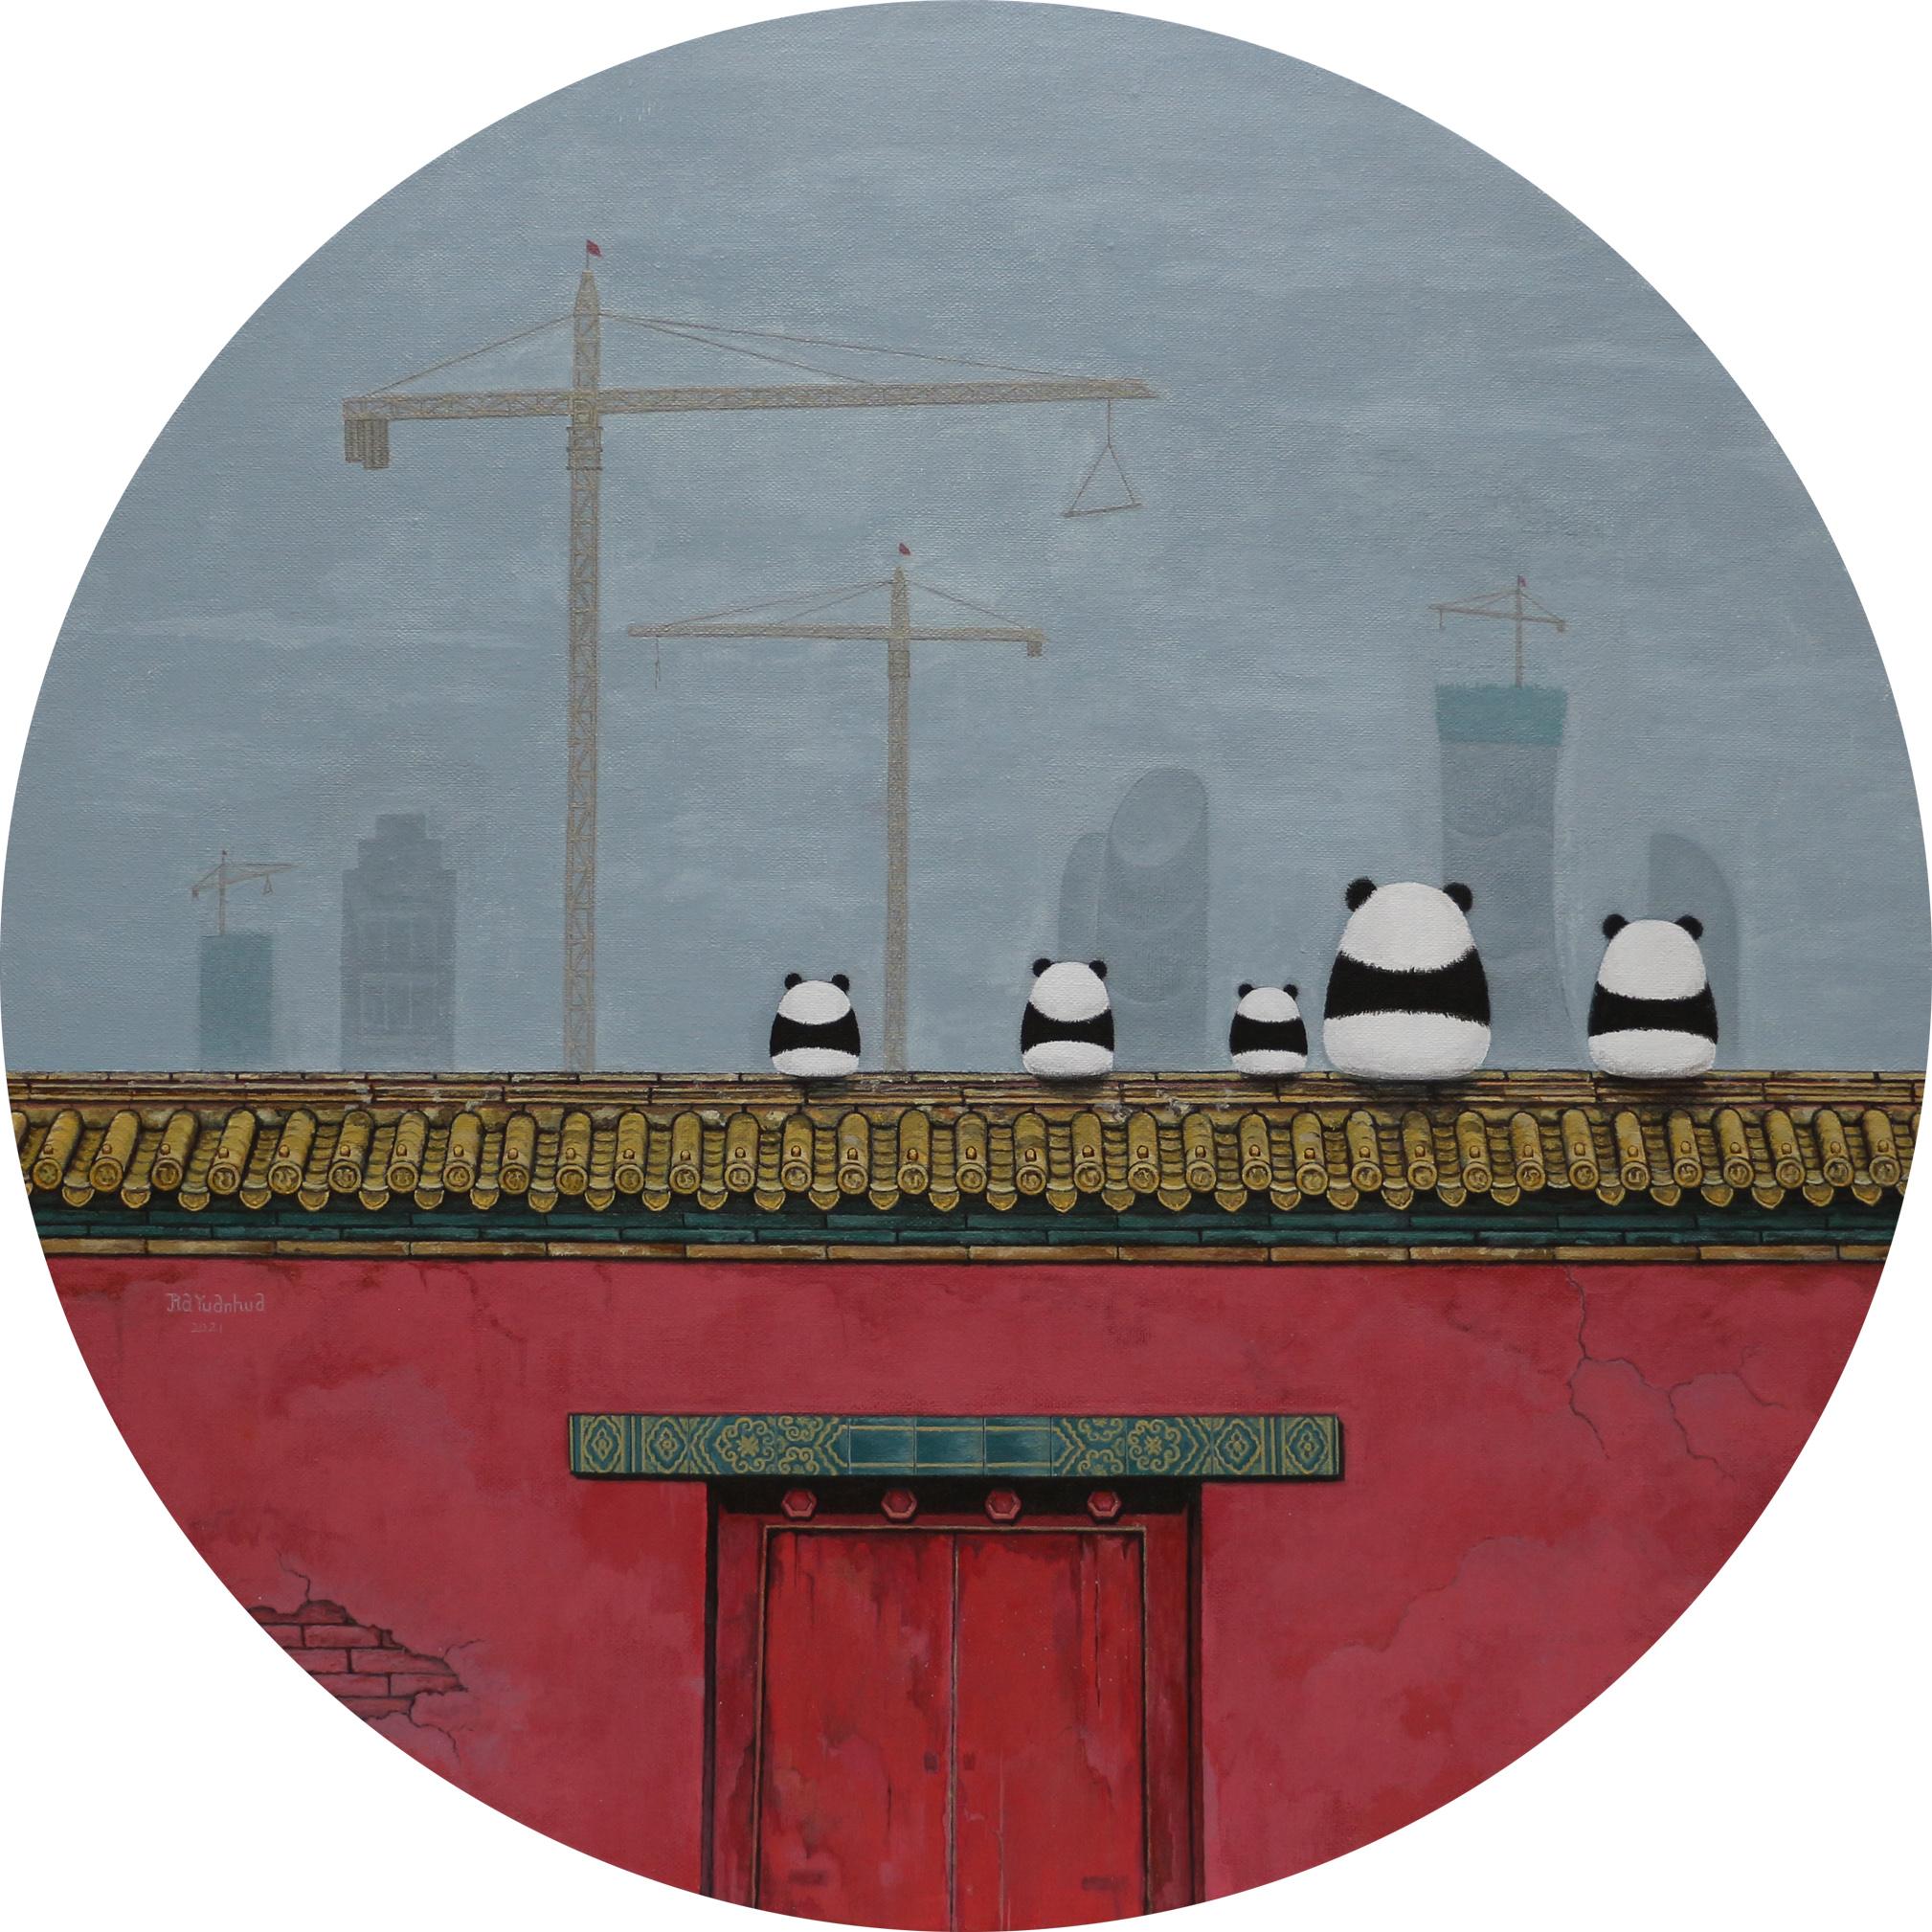 Acrylic on canvas

In China, pandas are very well protected. While many old buildings have to face the reality of being demolished and replaced by new buildings. Historical old buildings need protection, like we protect pandas. 